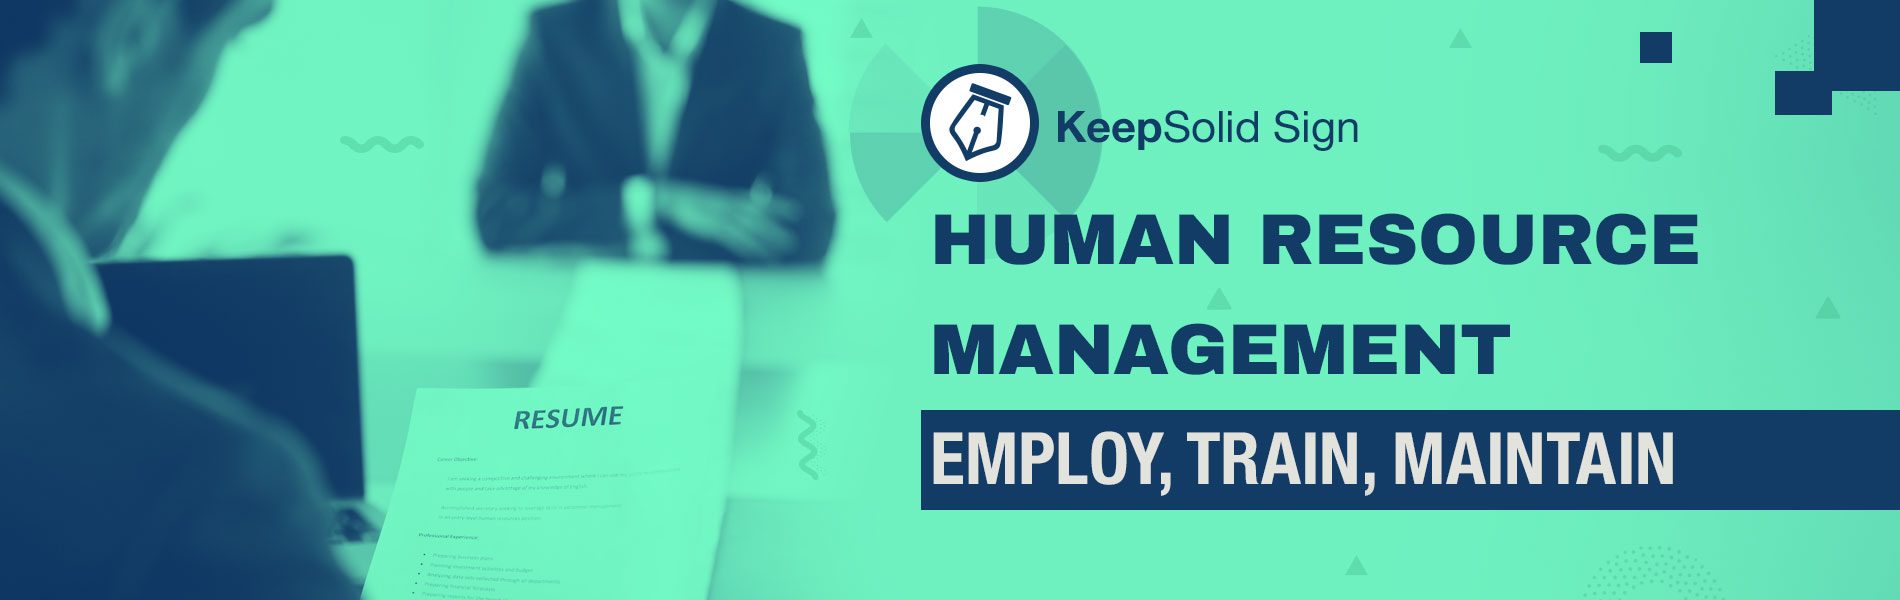 Perfect performance at job interview. Human resources management systems that help consider applications and choose the best employee